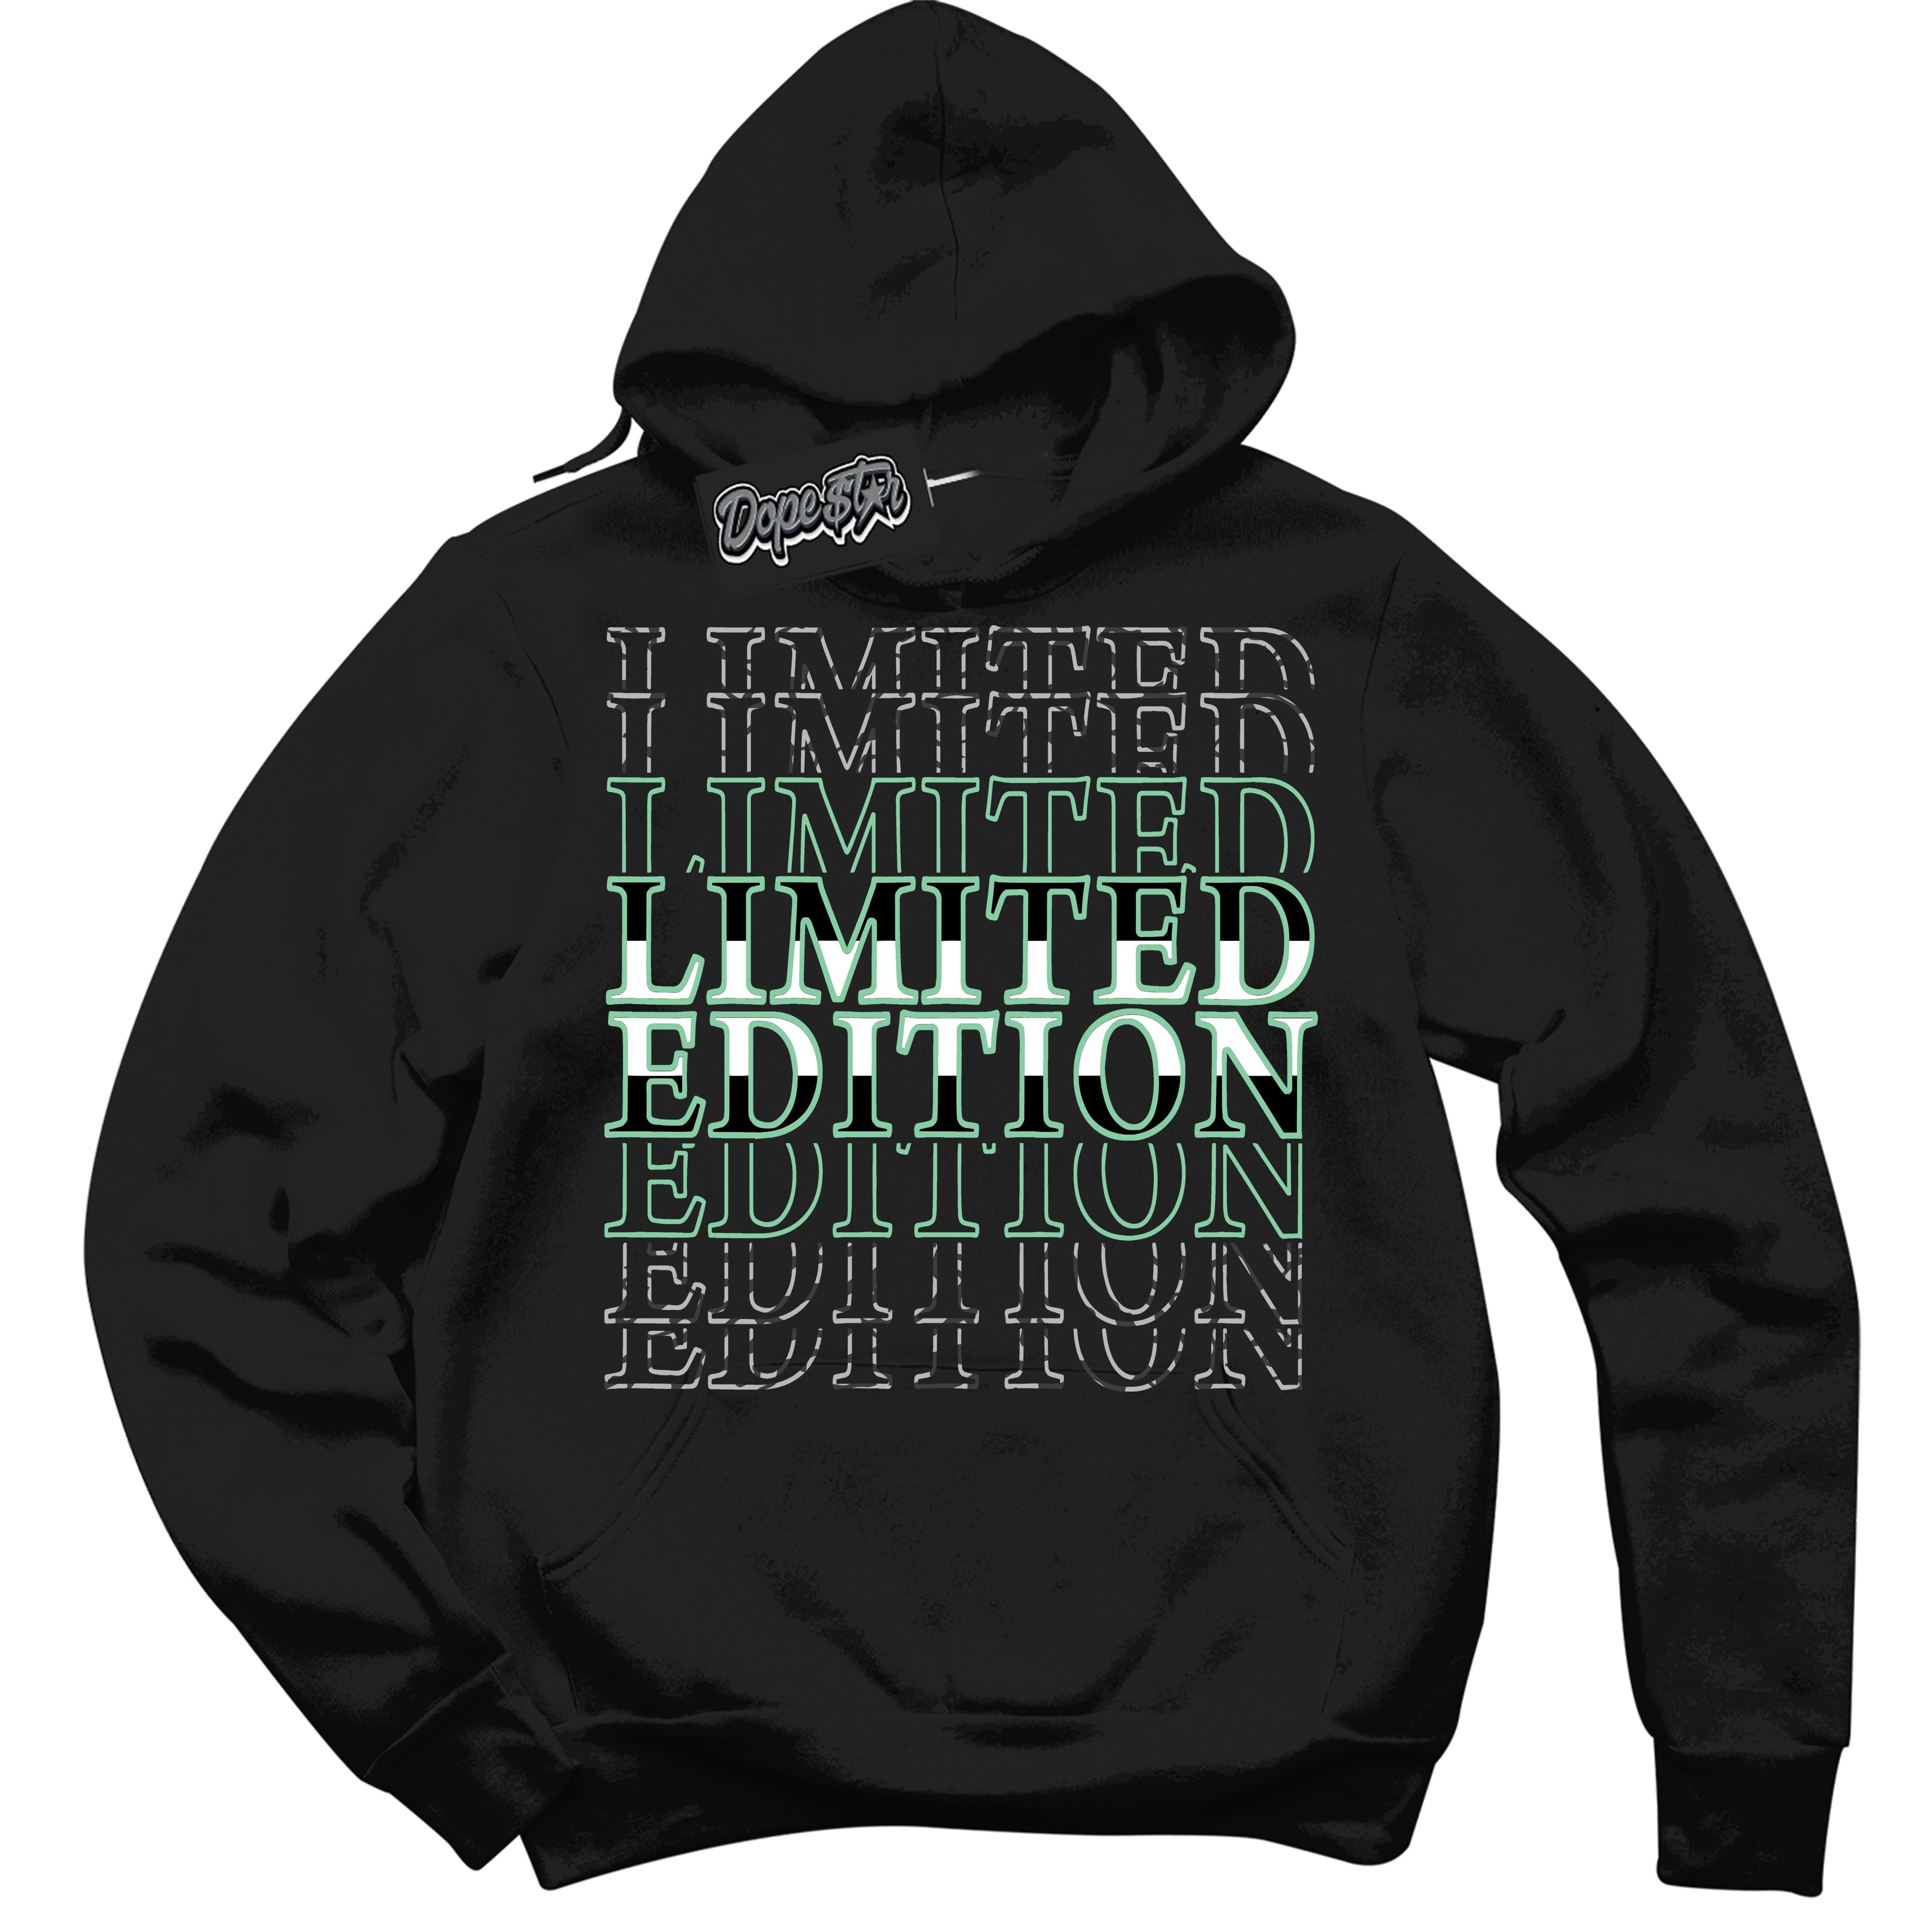 Cool Black Graphic DopeStar Hoodie with “ Limited Edition “ print, that perfectly matches Green Glow 3S sneakers